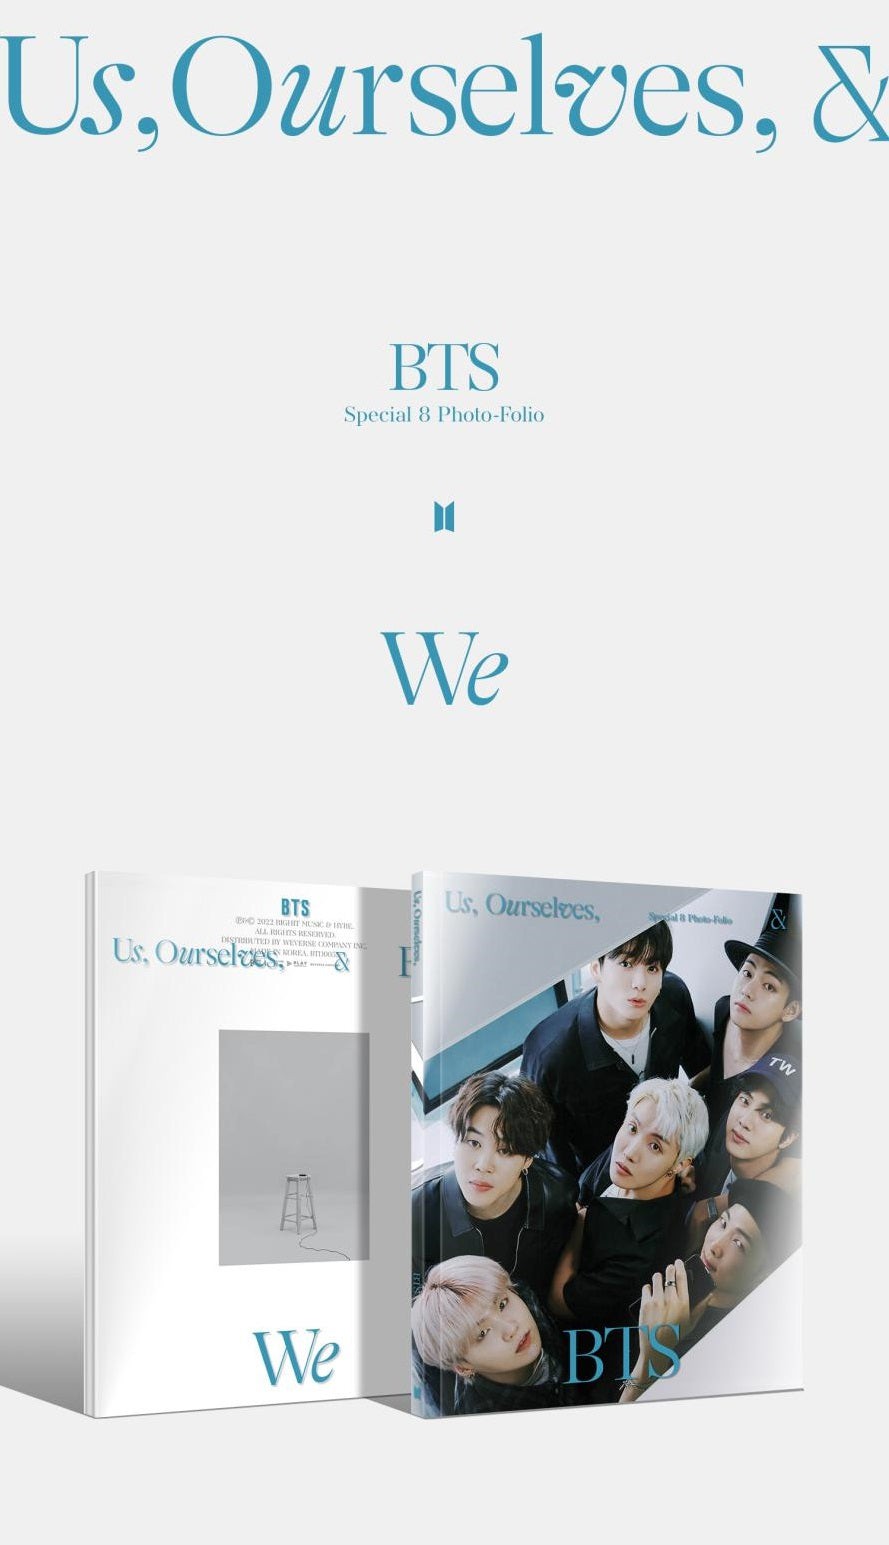 PRE ORDER BTS - SPECIAL 8 PHOTO FOLIO US OURSELVES AND BTS WE - COKODIVE